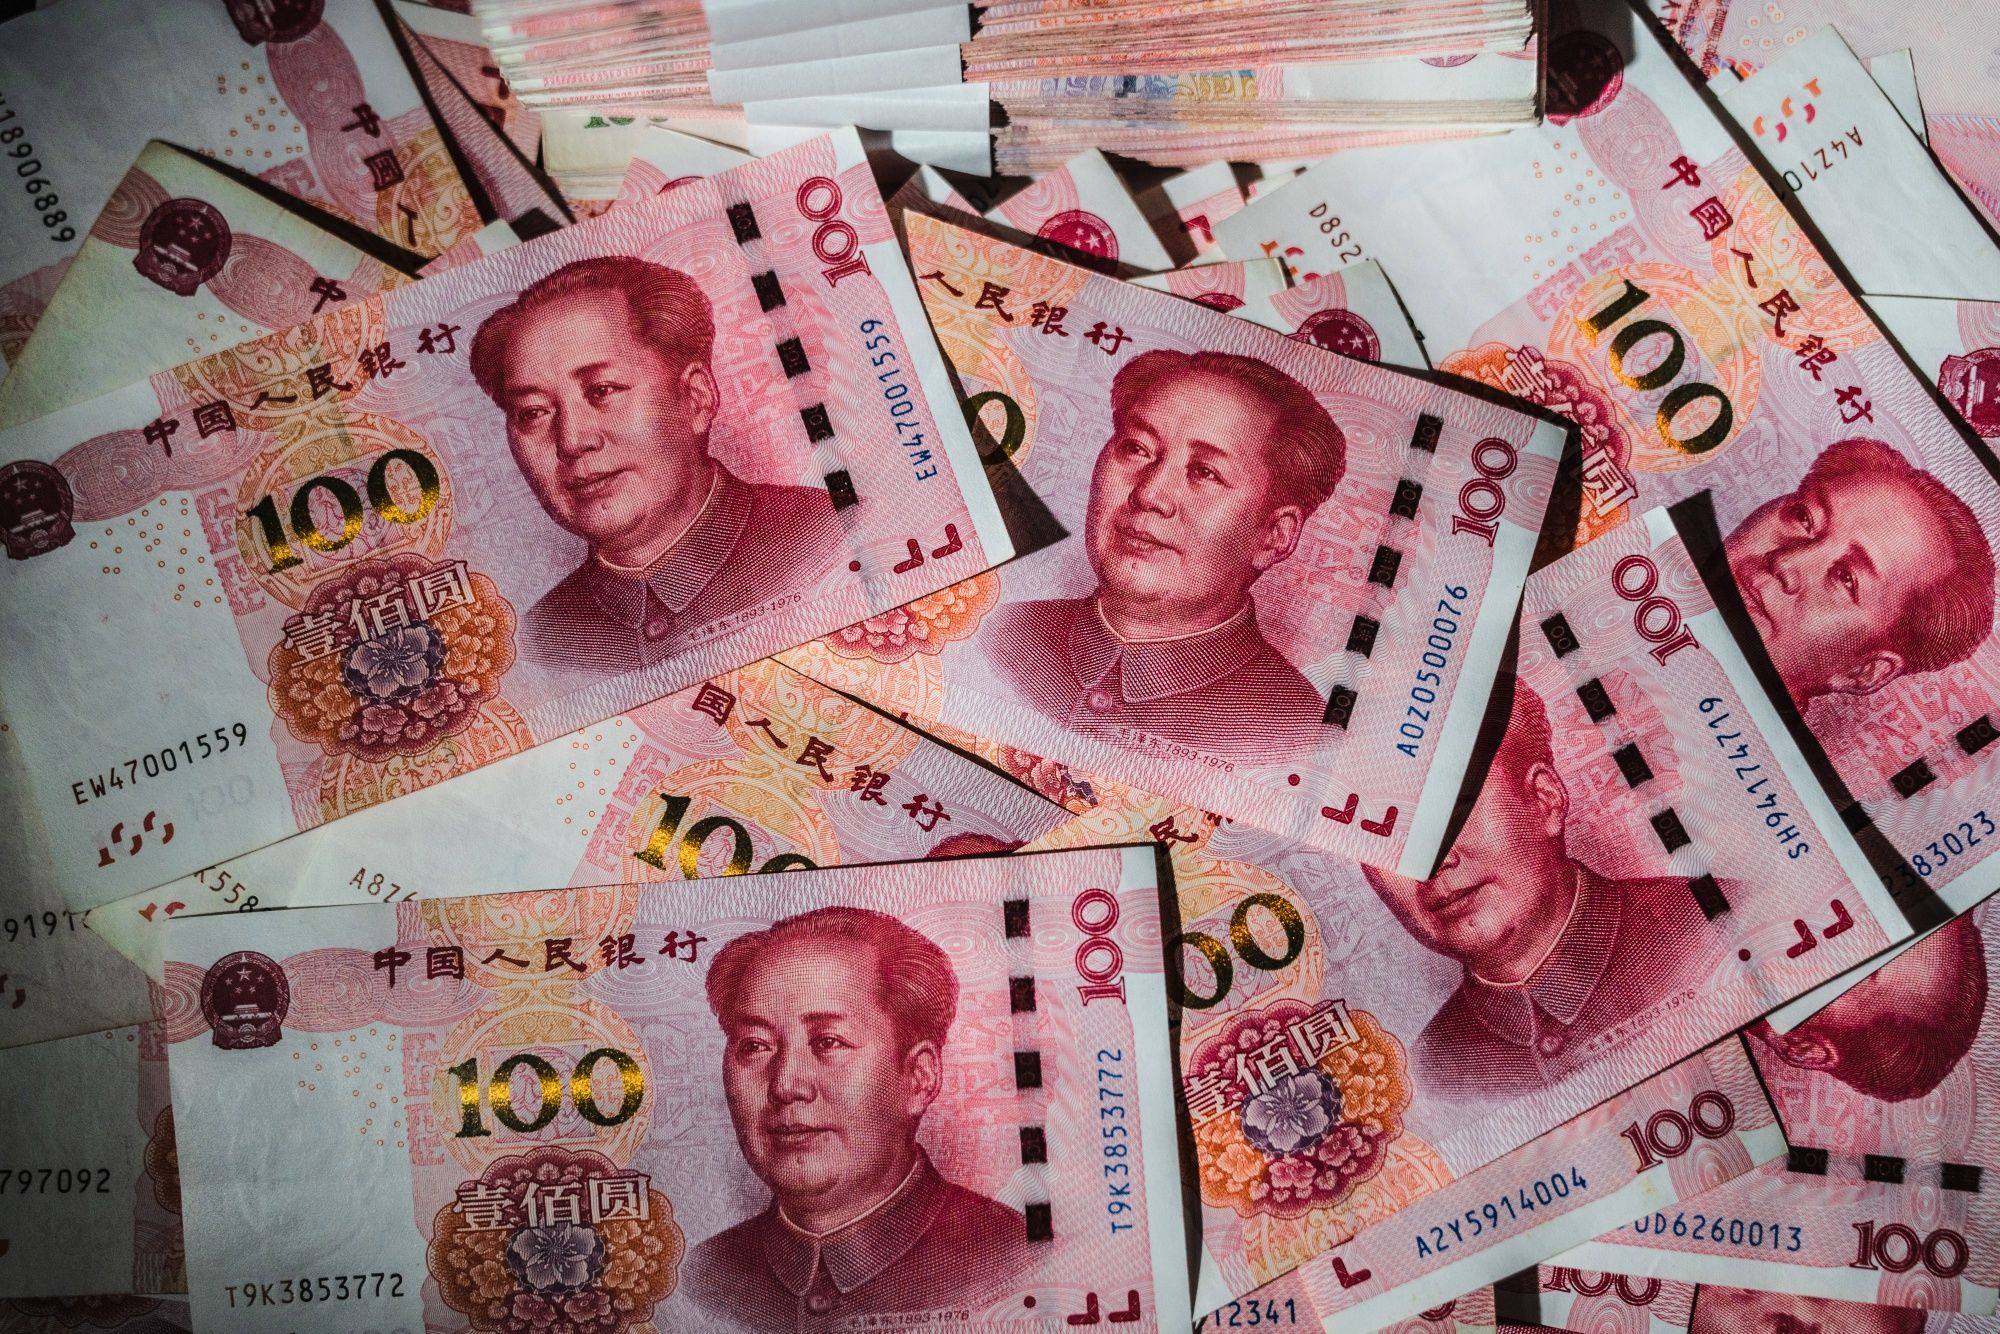 US money manager BNY Mellon Investment Management has turned bearish on the yuan and is less bullish on Chinese equities. Photo: Bloomberg